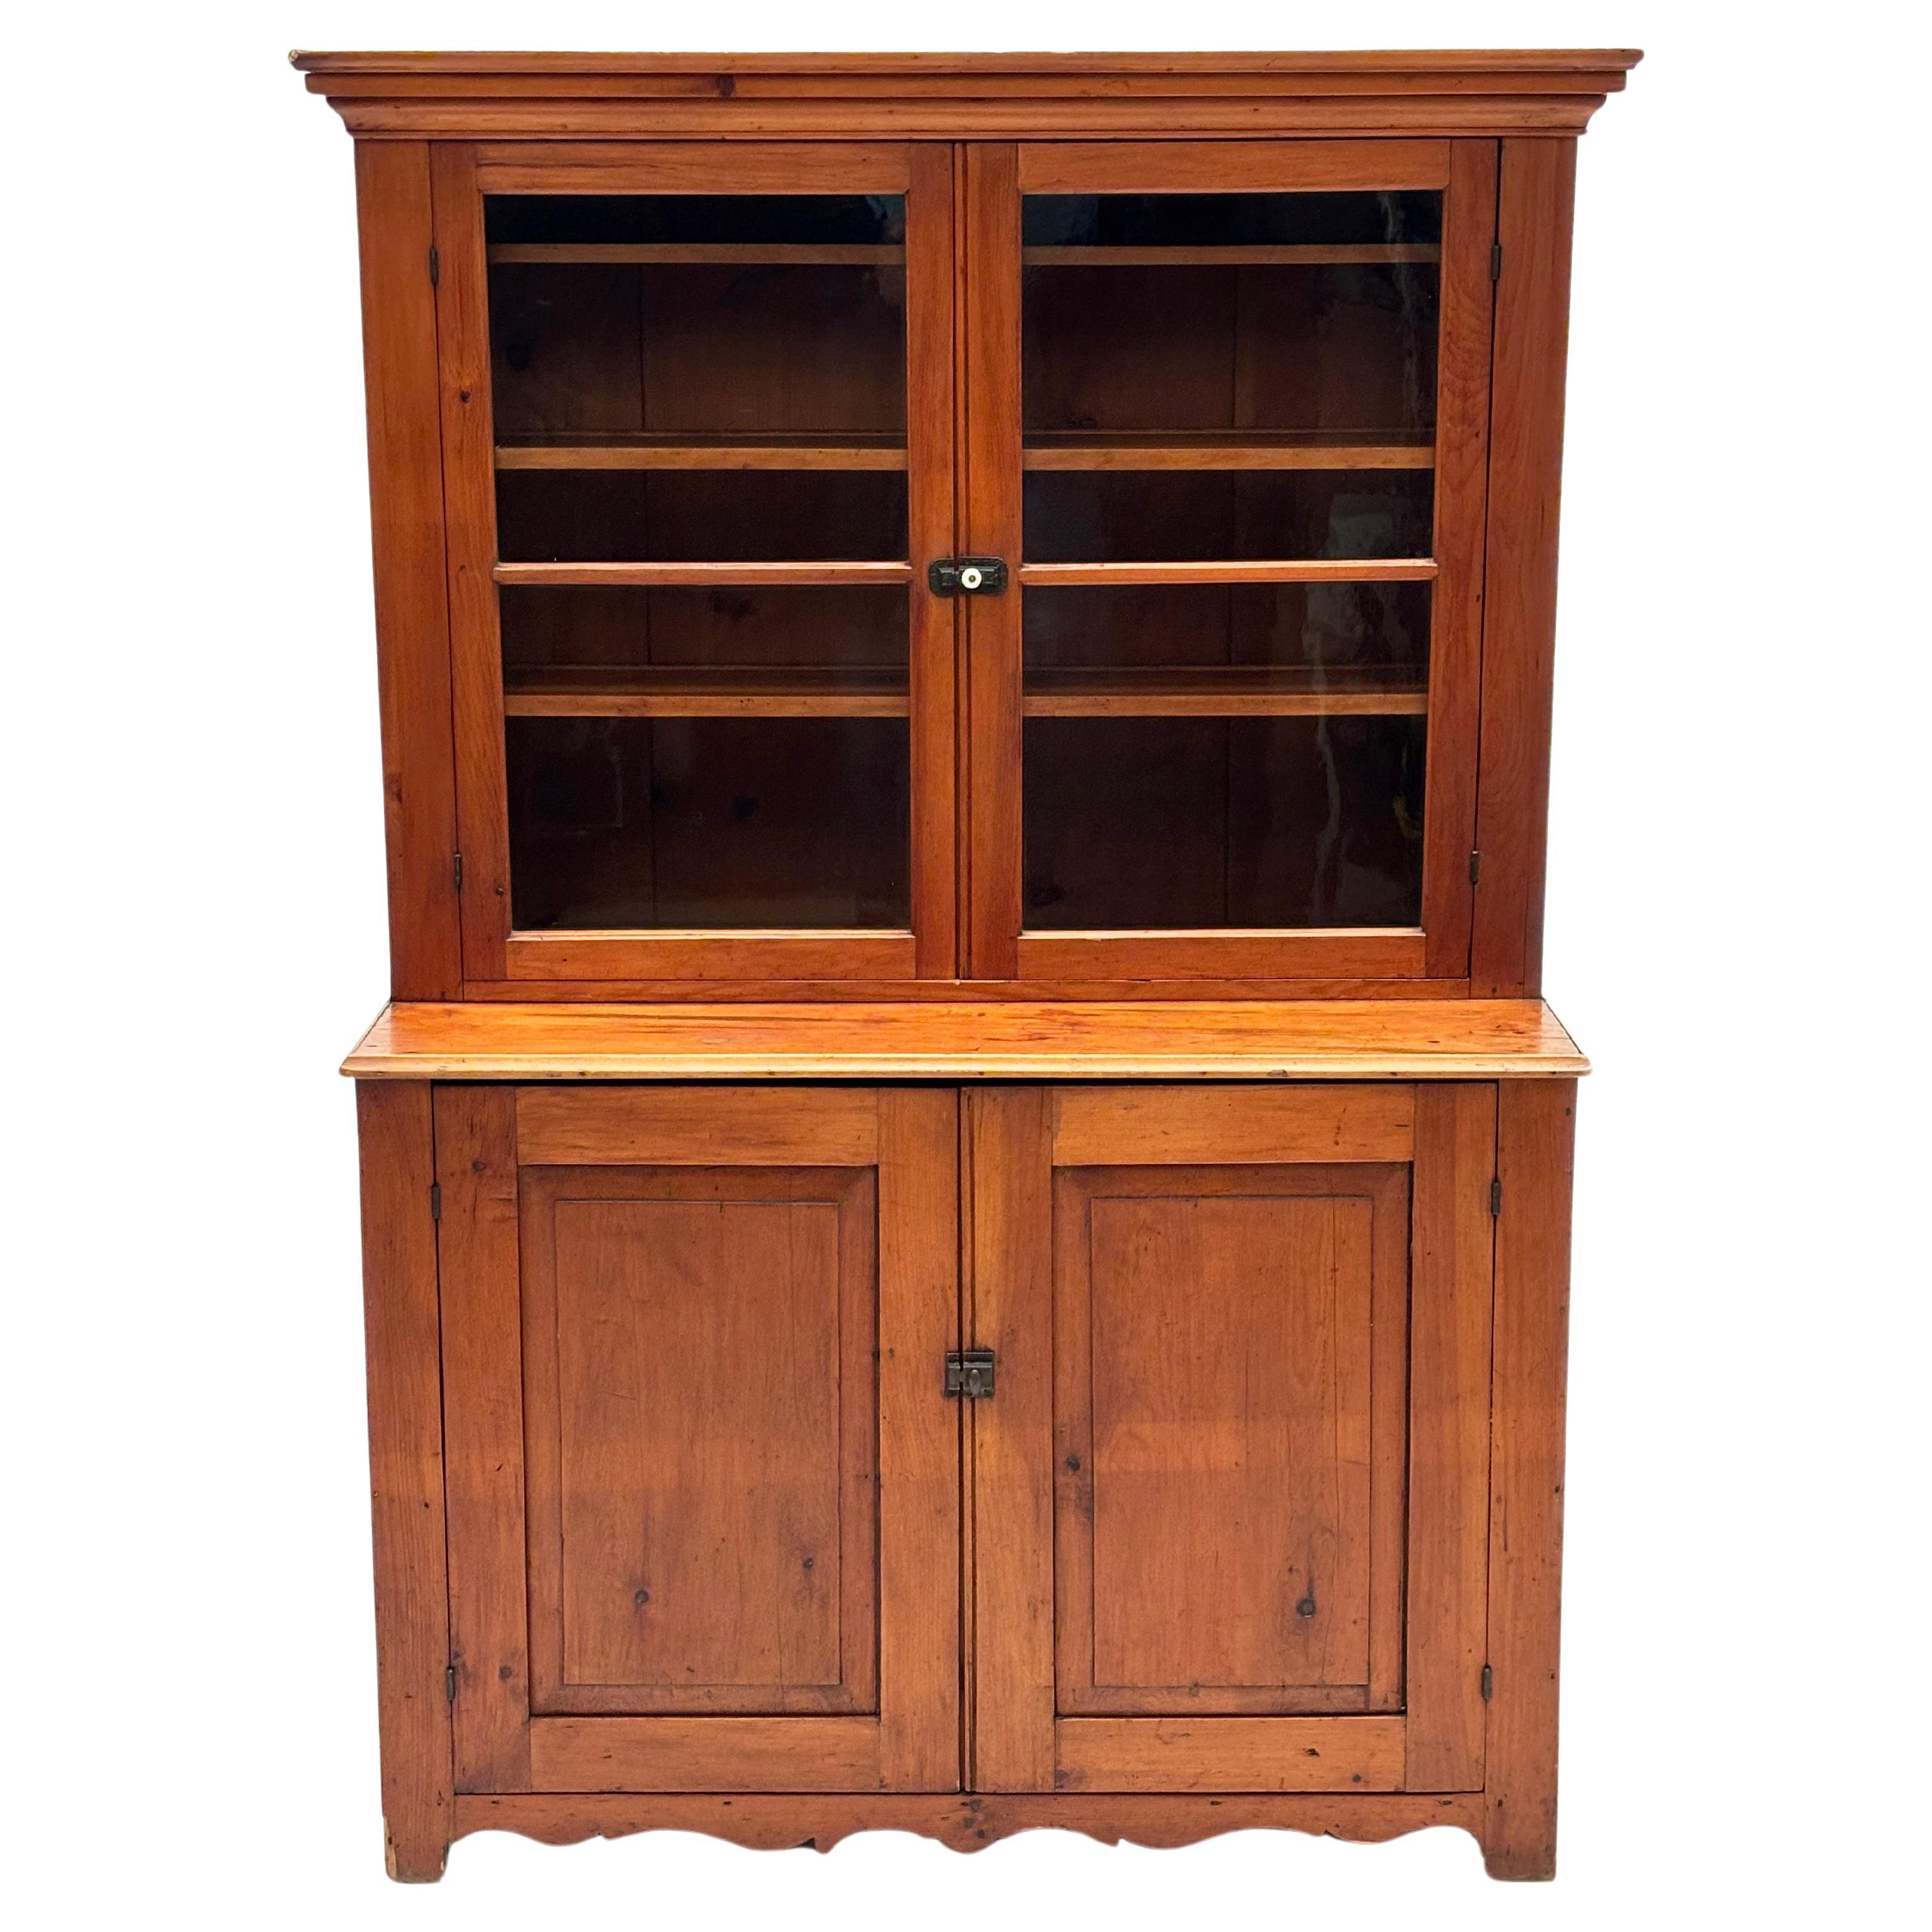 Early 1800’s Pennsylvania Dutch Pine Country Cupboard with Wavy Glass Doors